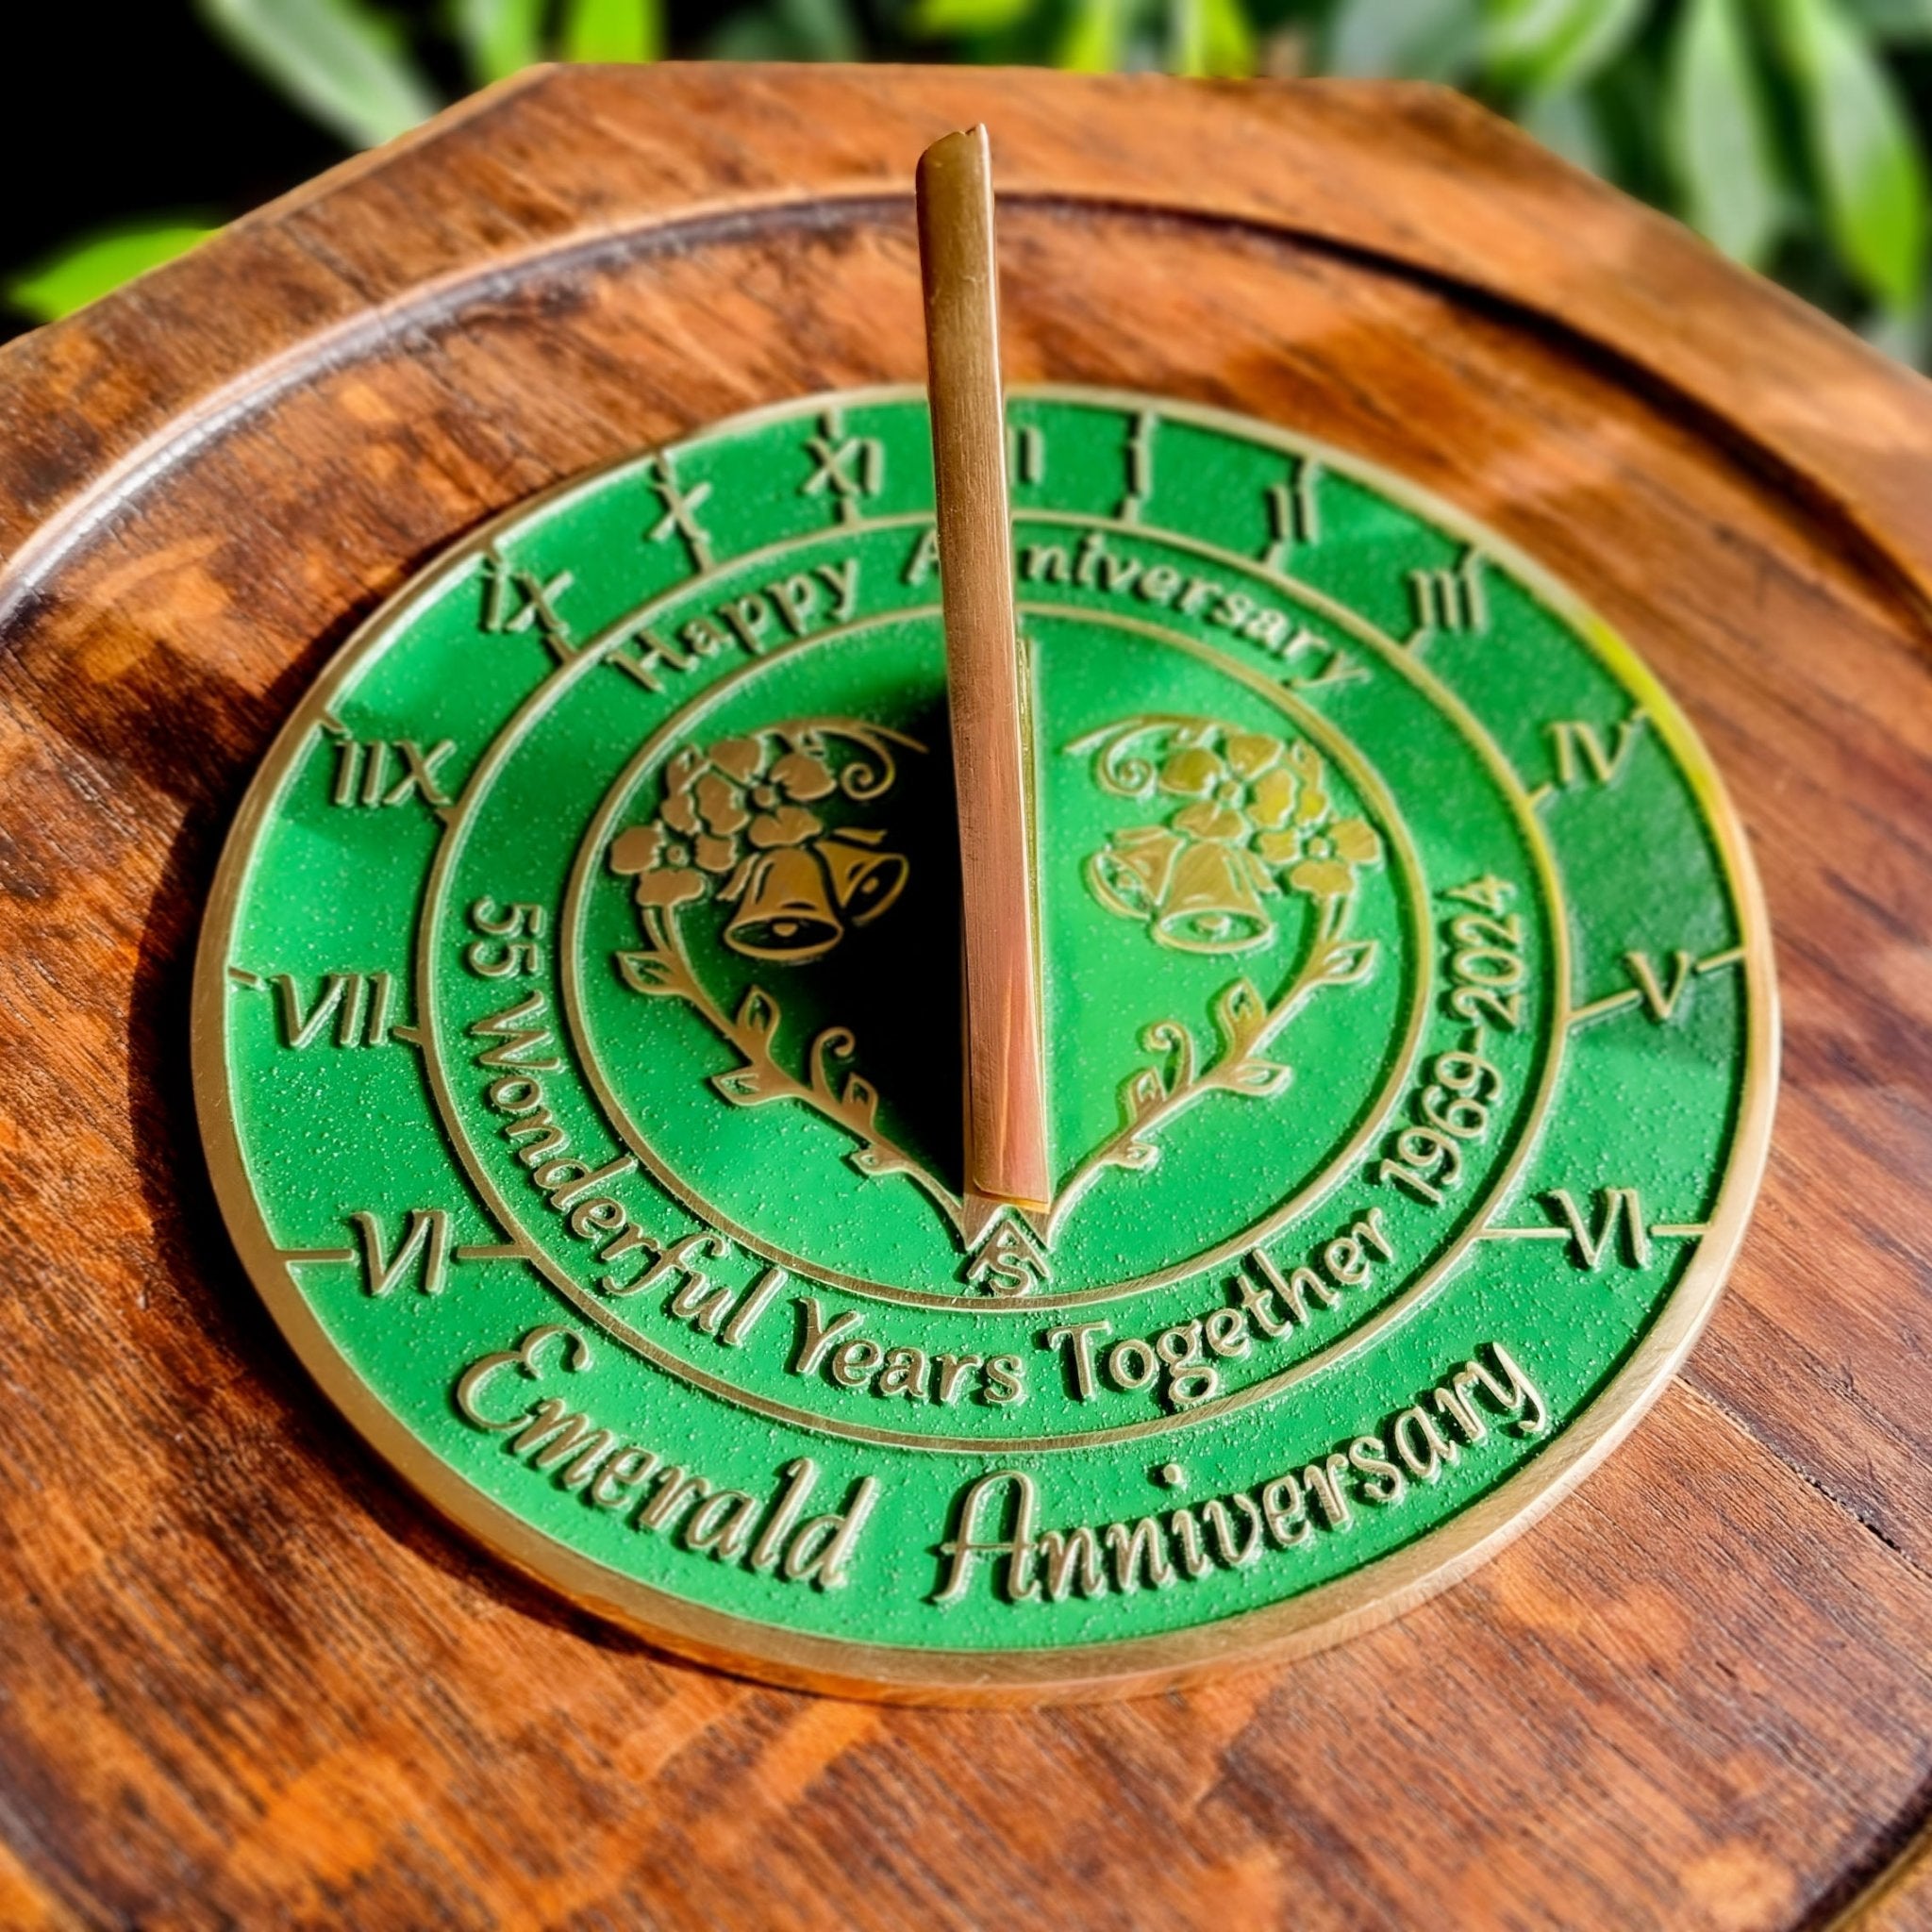 Emerald 55th Anniversary Sundial Gift - The Metal Foundry